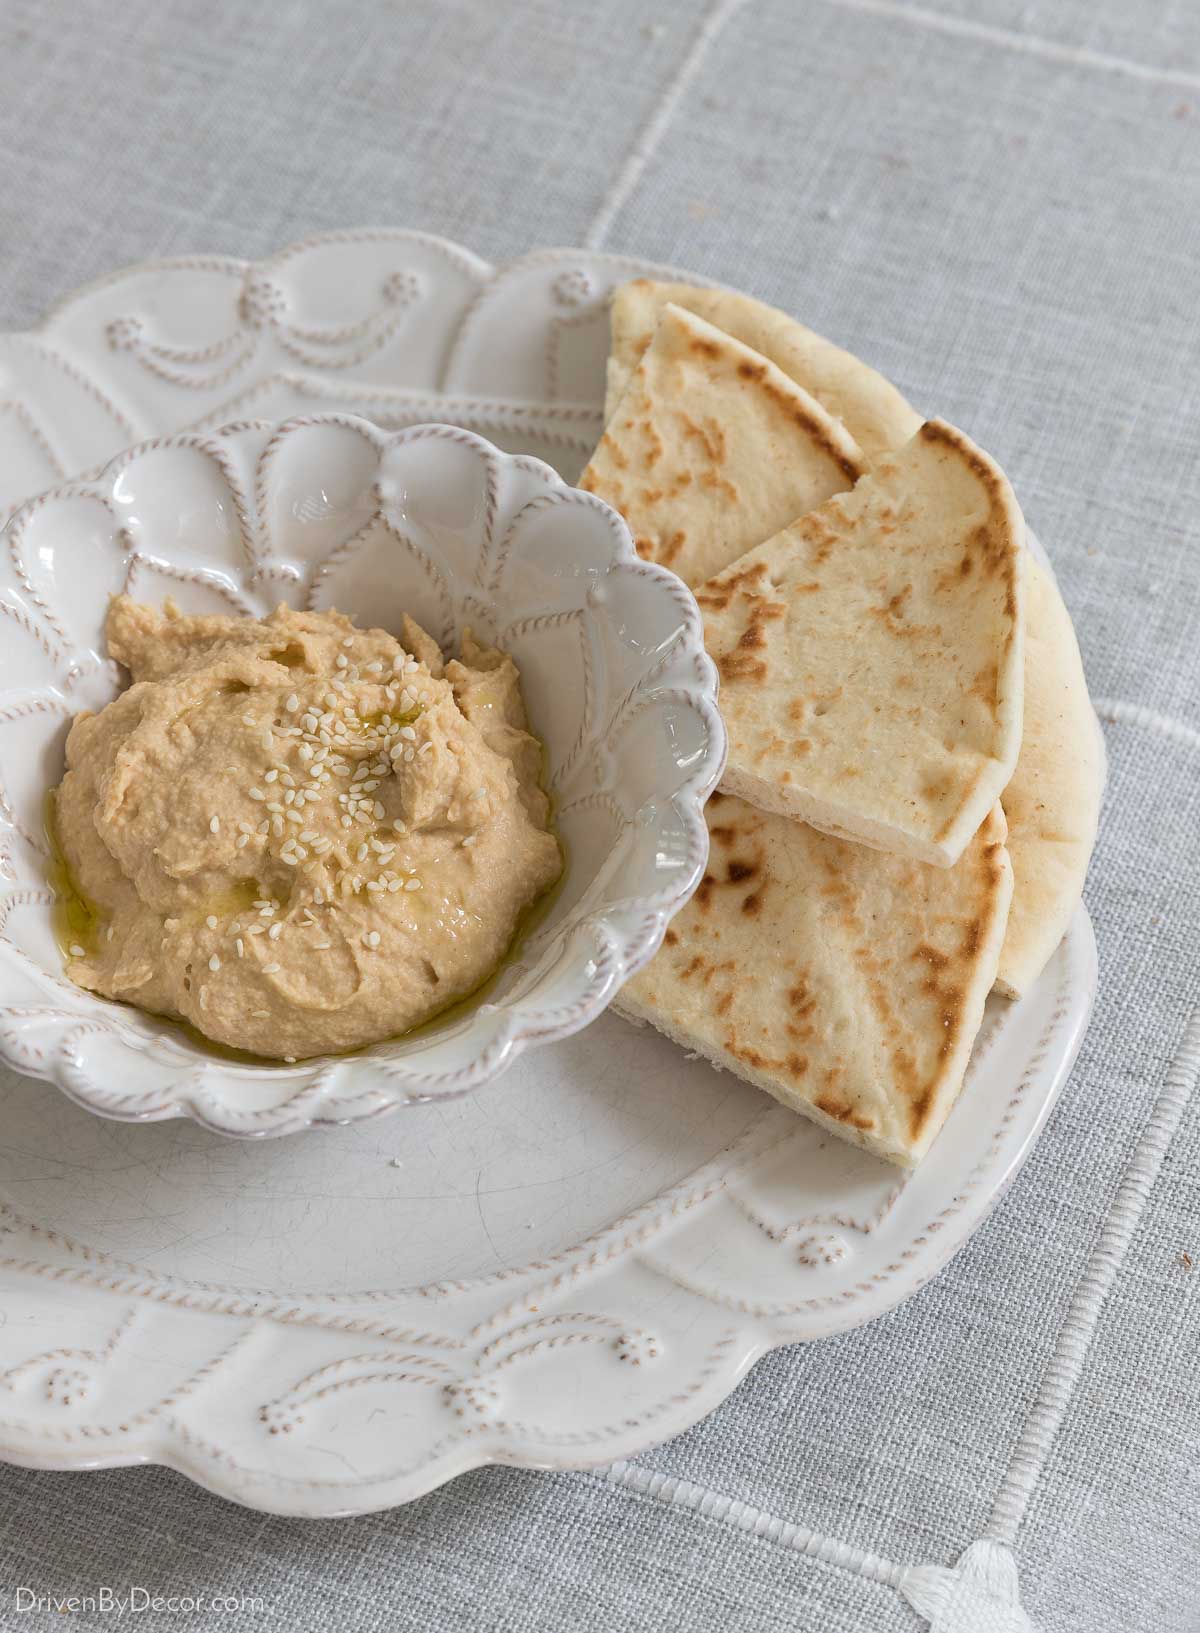 Love this homemade hummus! So easy to make with one of my favorite small kitchen appliances!